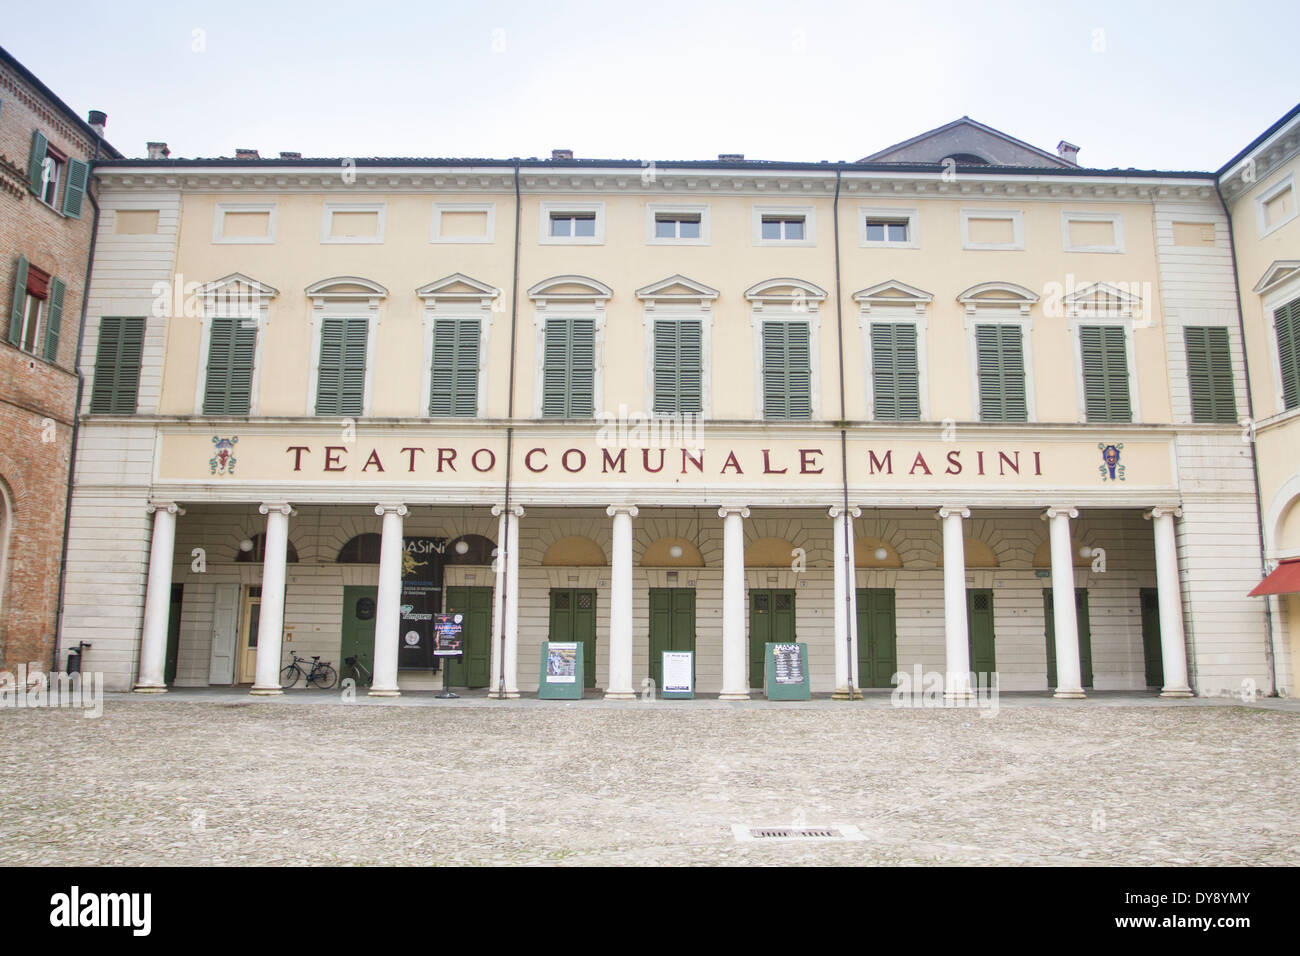 Teatro Comunale Masini High Resolution Stock Photography and Images - Alamy